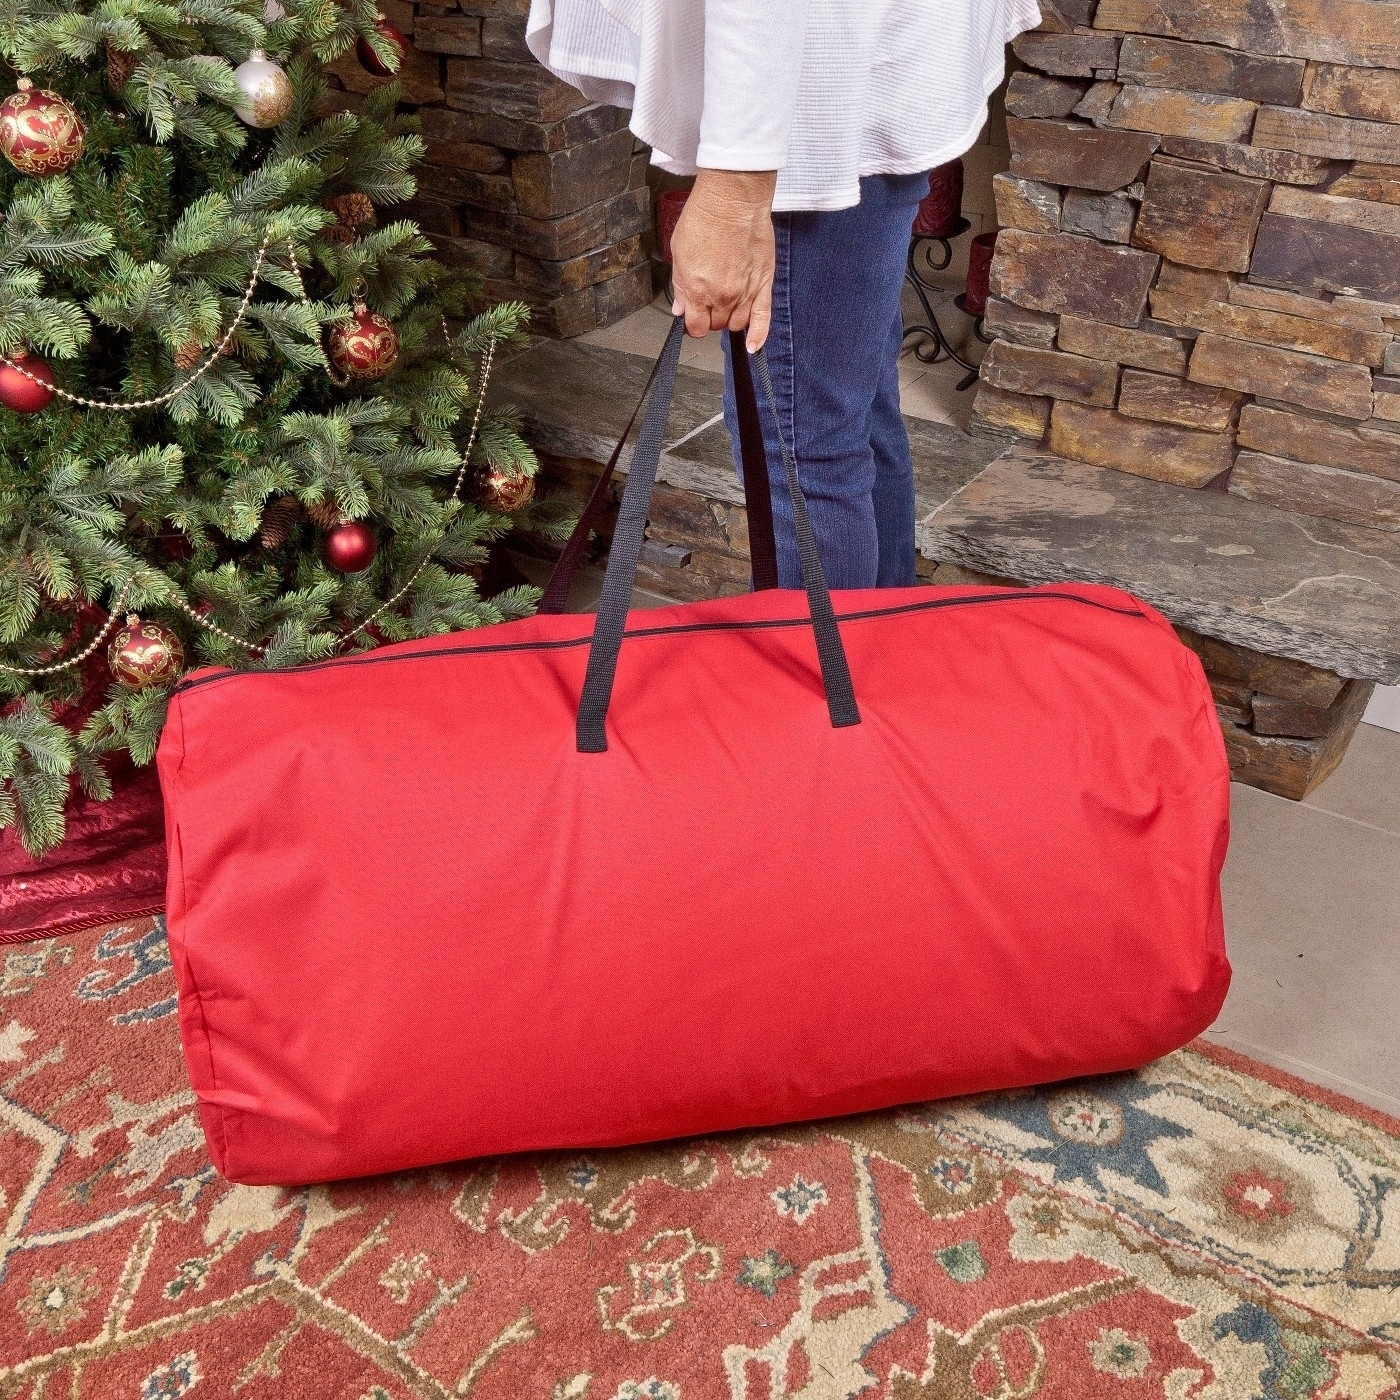 Fraser Hill Farm Red Polyester Heavy-Duty Storage Bag for Small